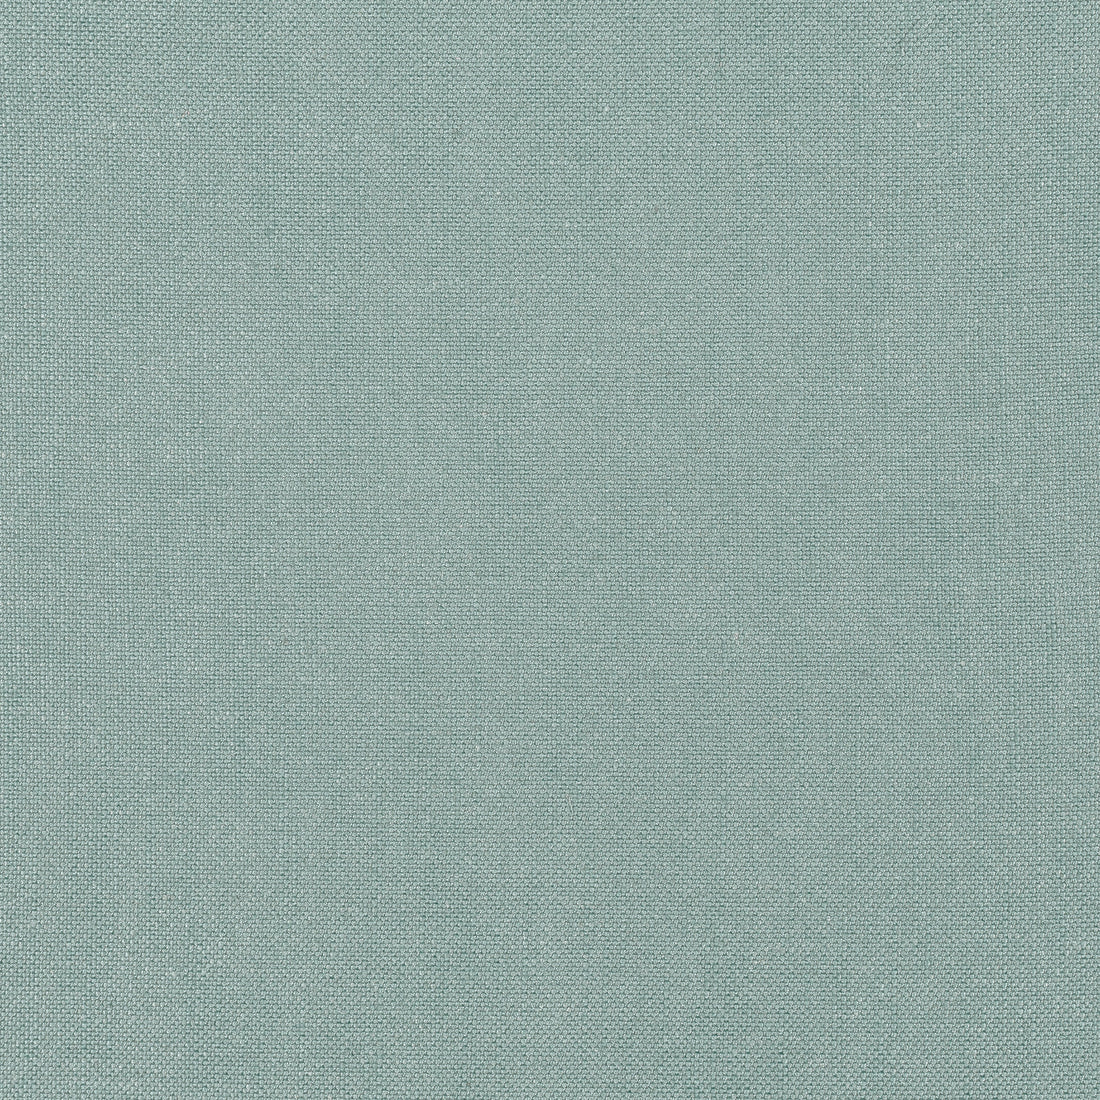 Palisade Linen fabric in seaglass color - pattern number FWW7622 - by Thibaut in the Palisades collection